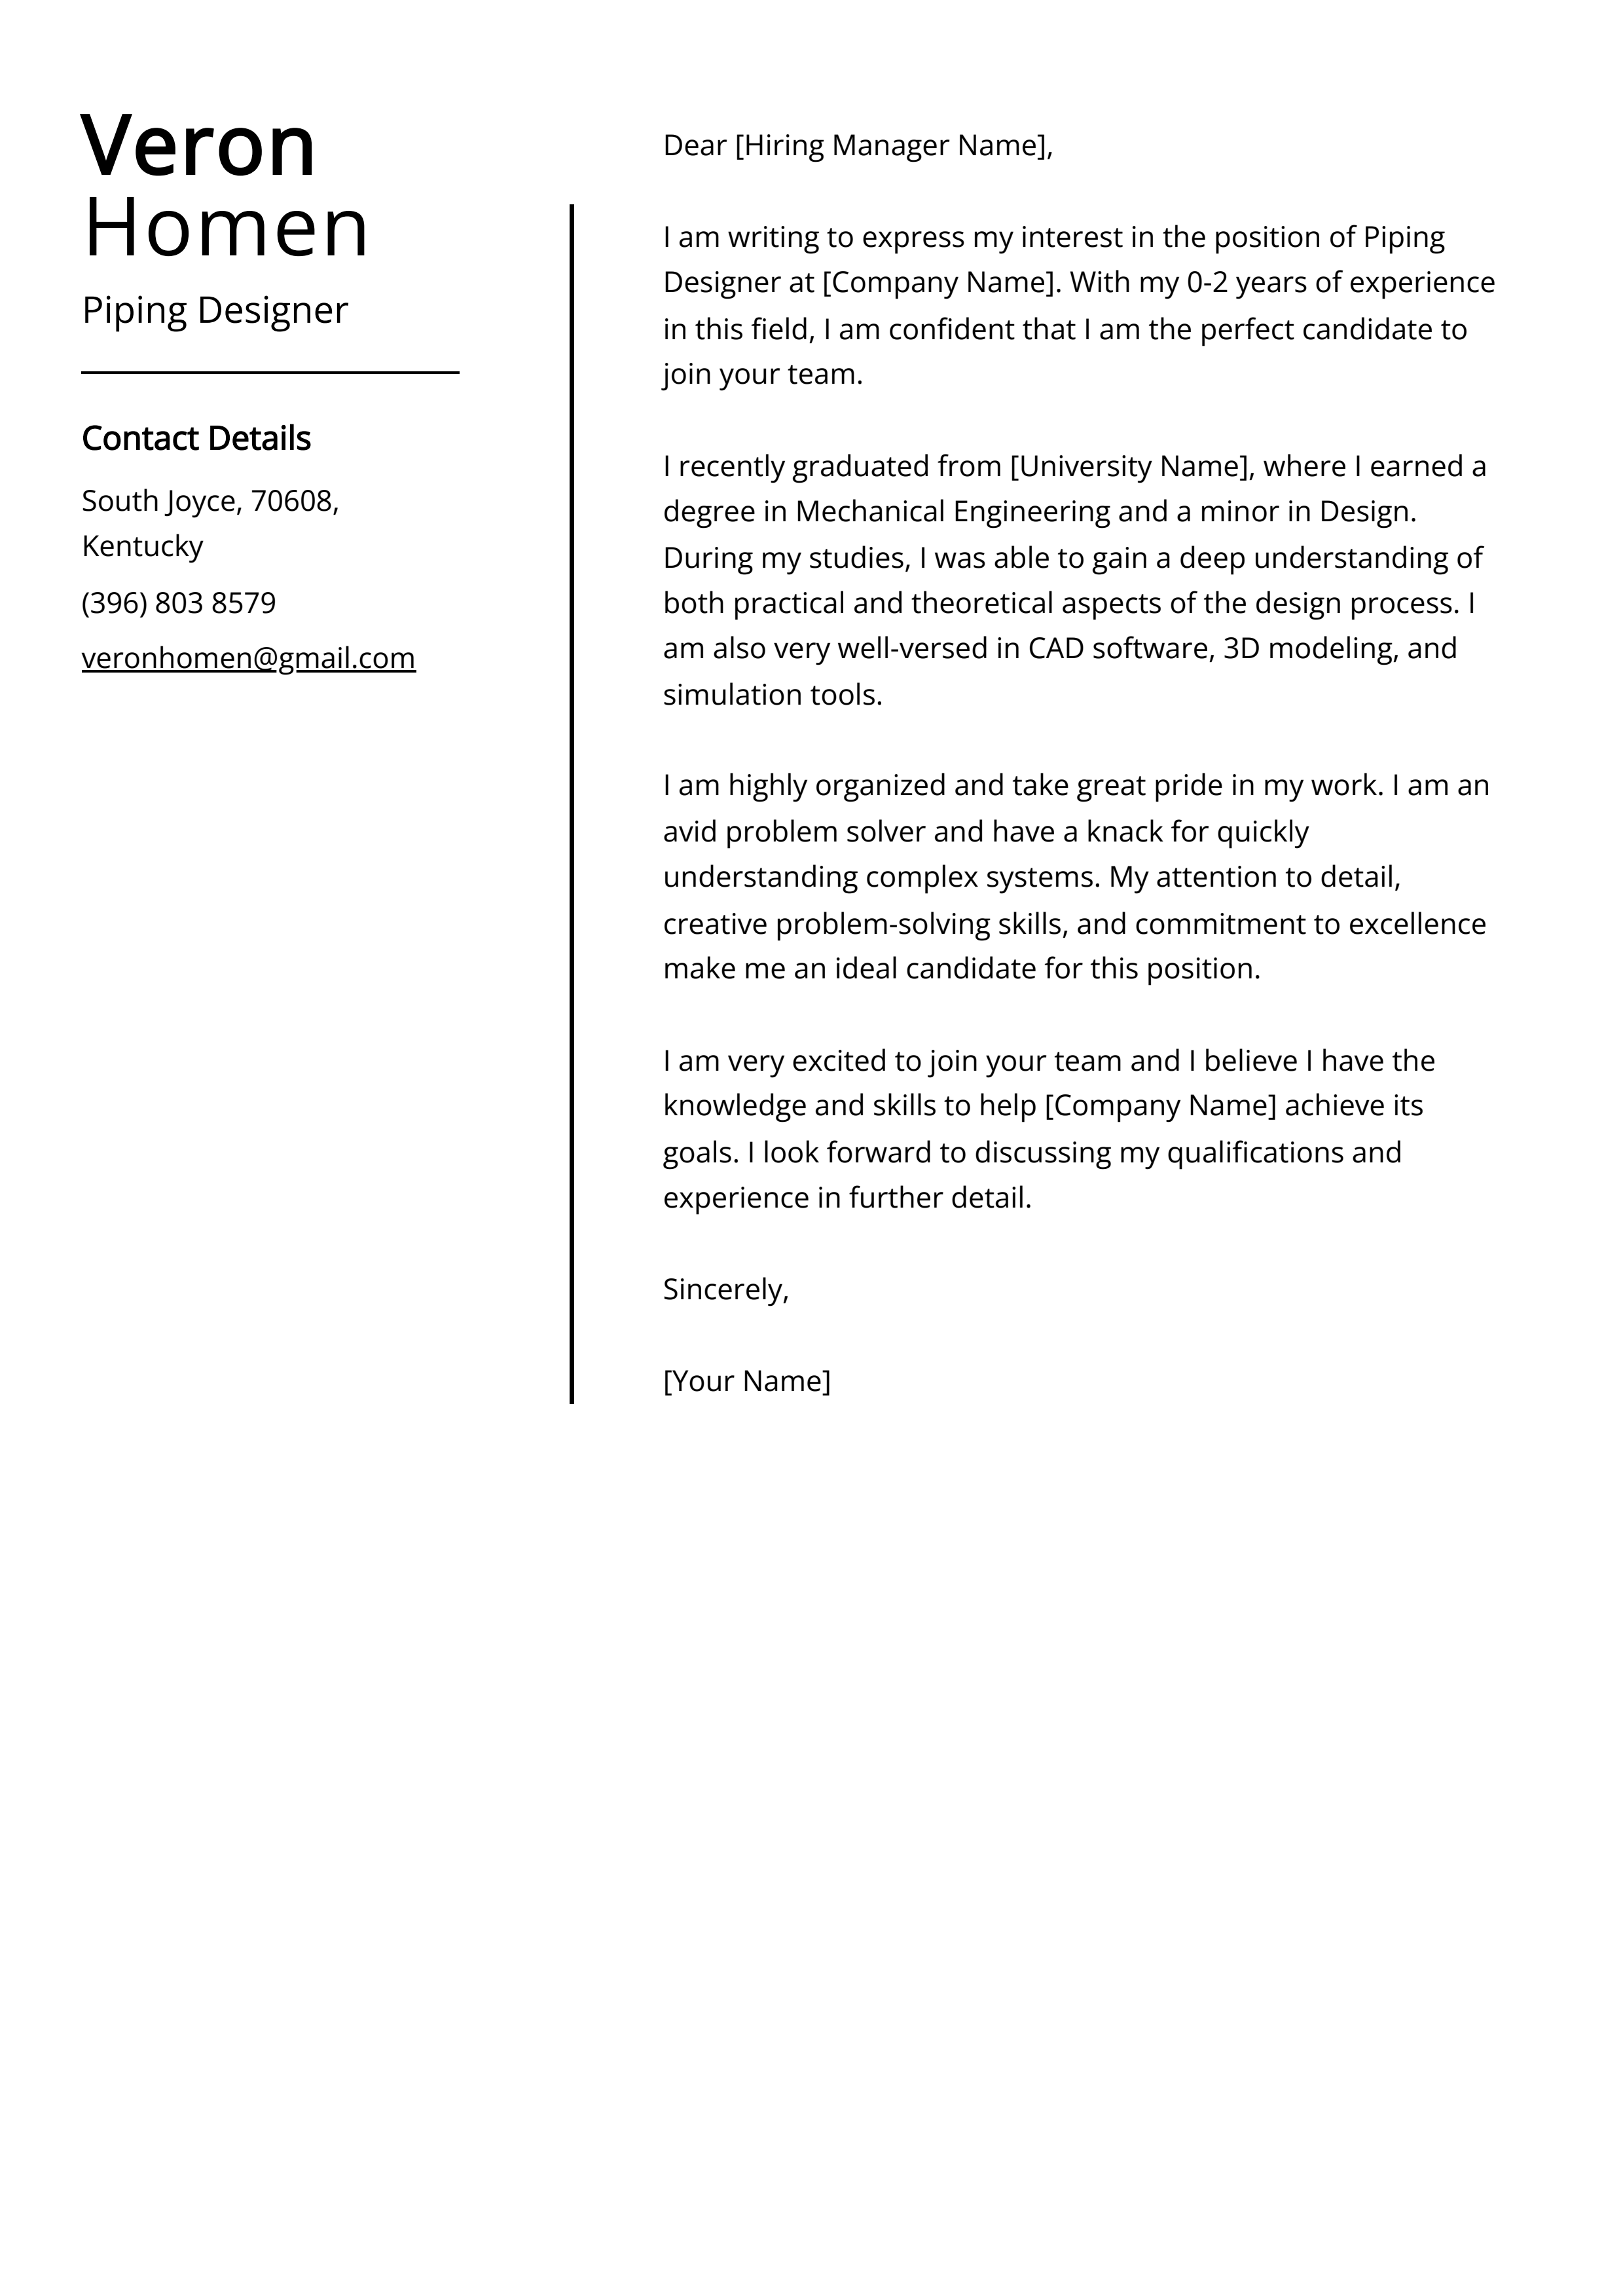 Piping Designer Cover Letter Example